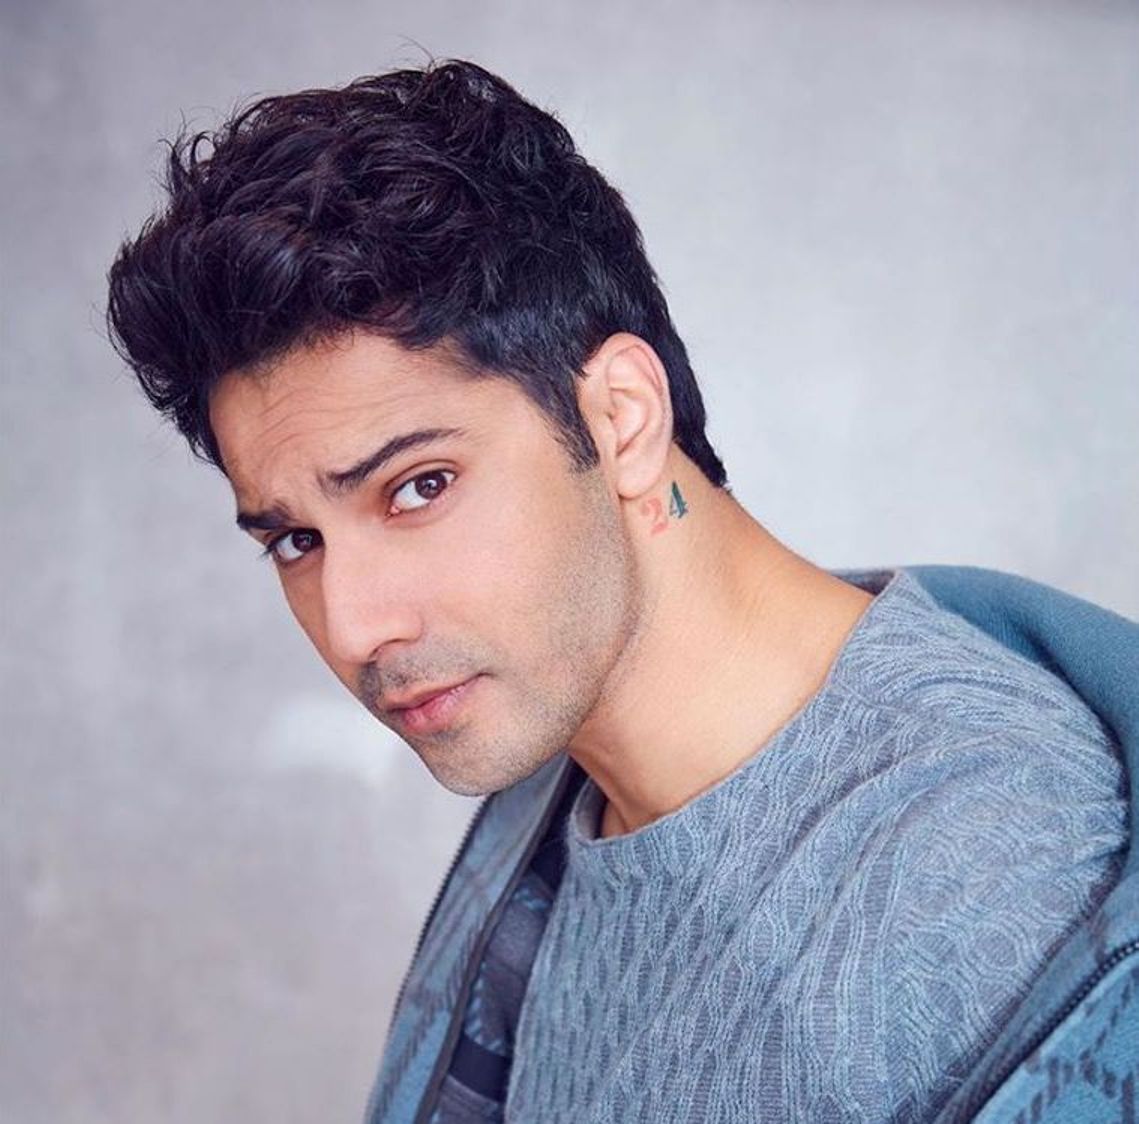 Varun Dhawan To Now Provide Meals To the Poor ‘Without Jobs And Homes’ And Doctors And Medical Staff; Read Statement